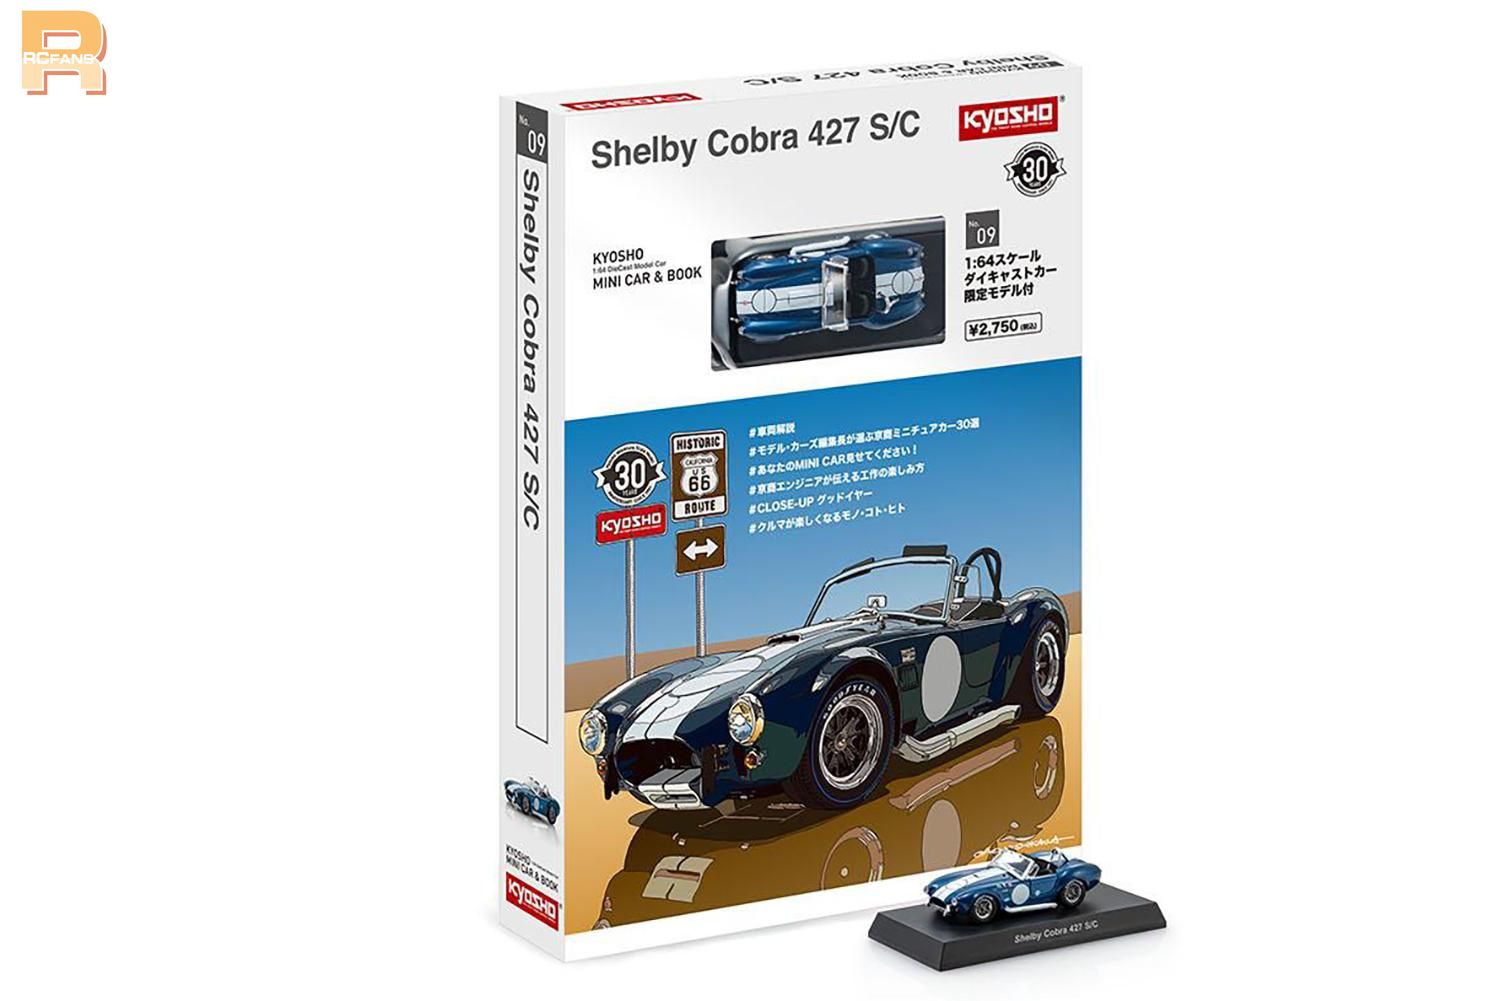 RCFans KYOSHO MINI CAR & BOOK Shelby Cobra - Powered by Discuz!